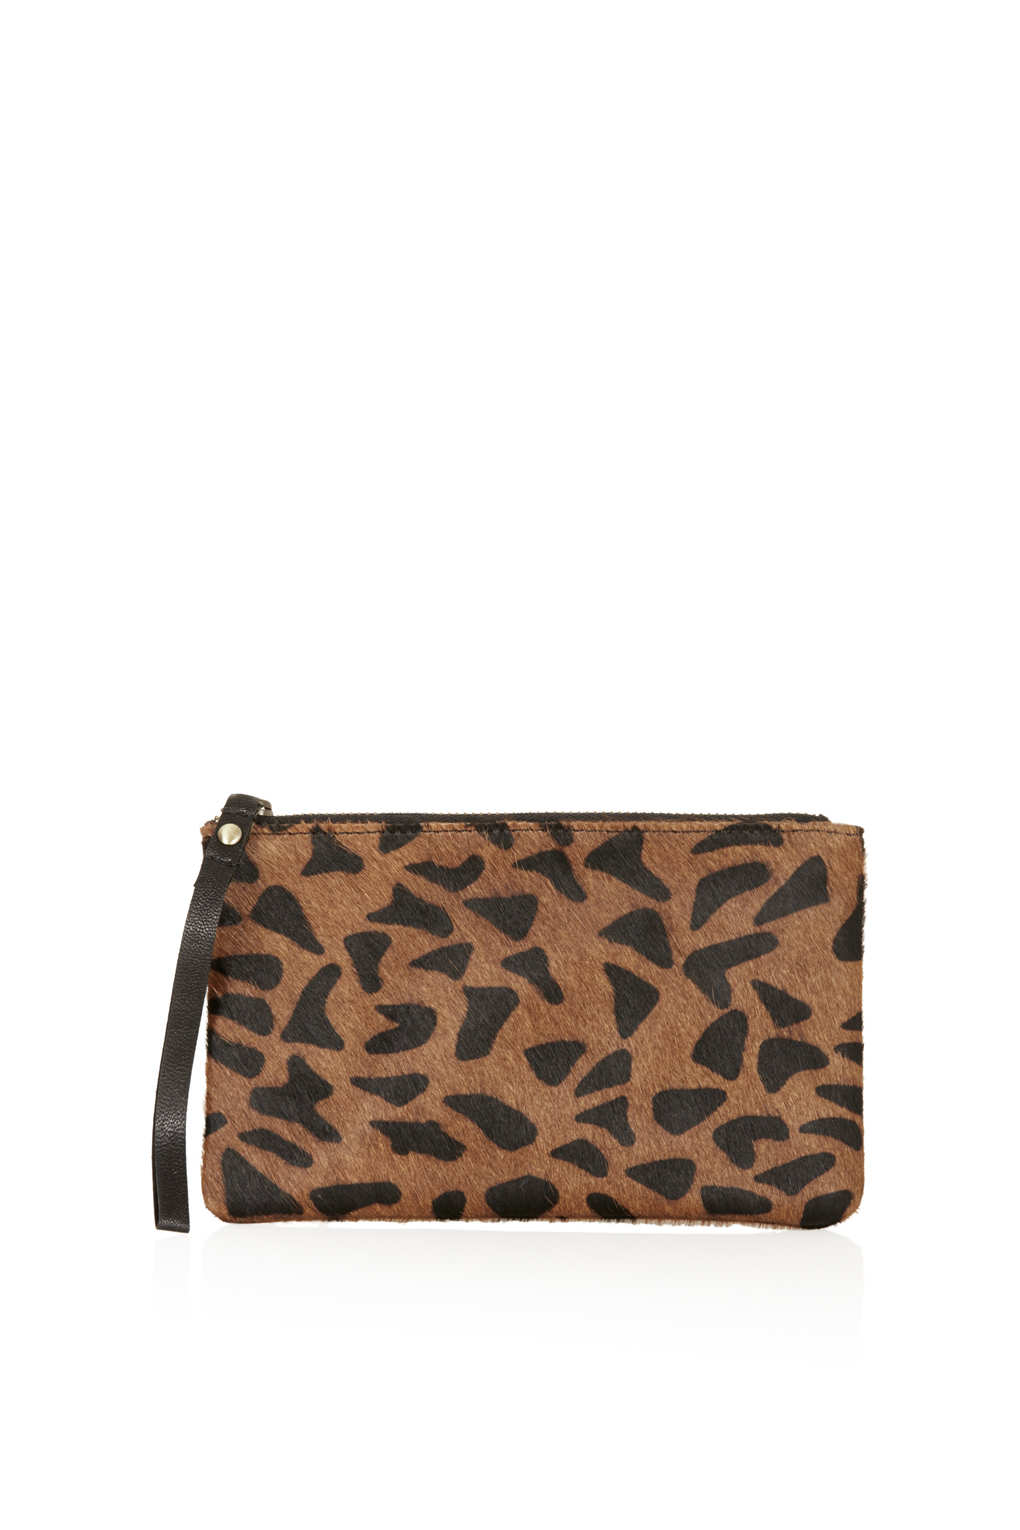 Lyst - Topshop Leather Pouch Purse in Brown